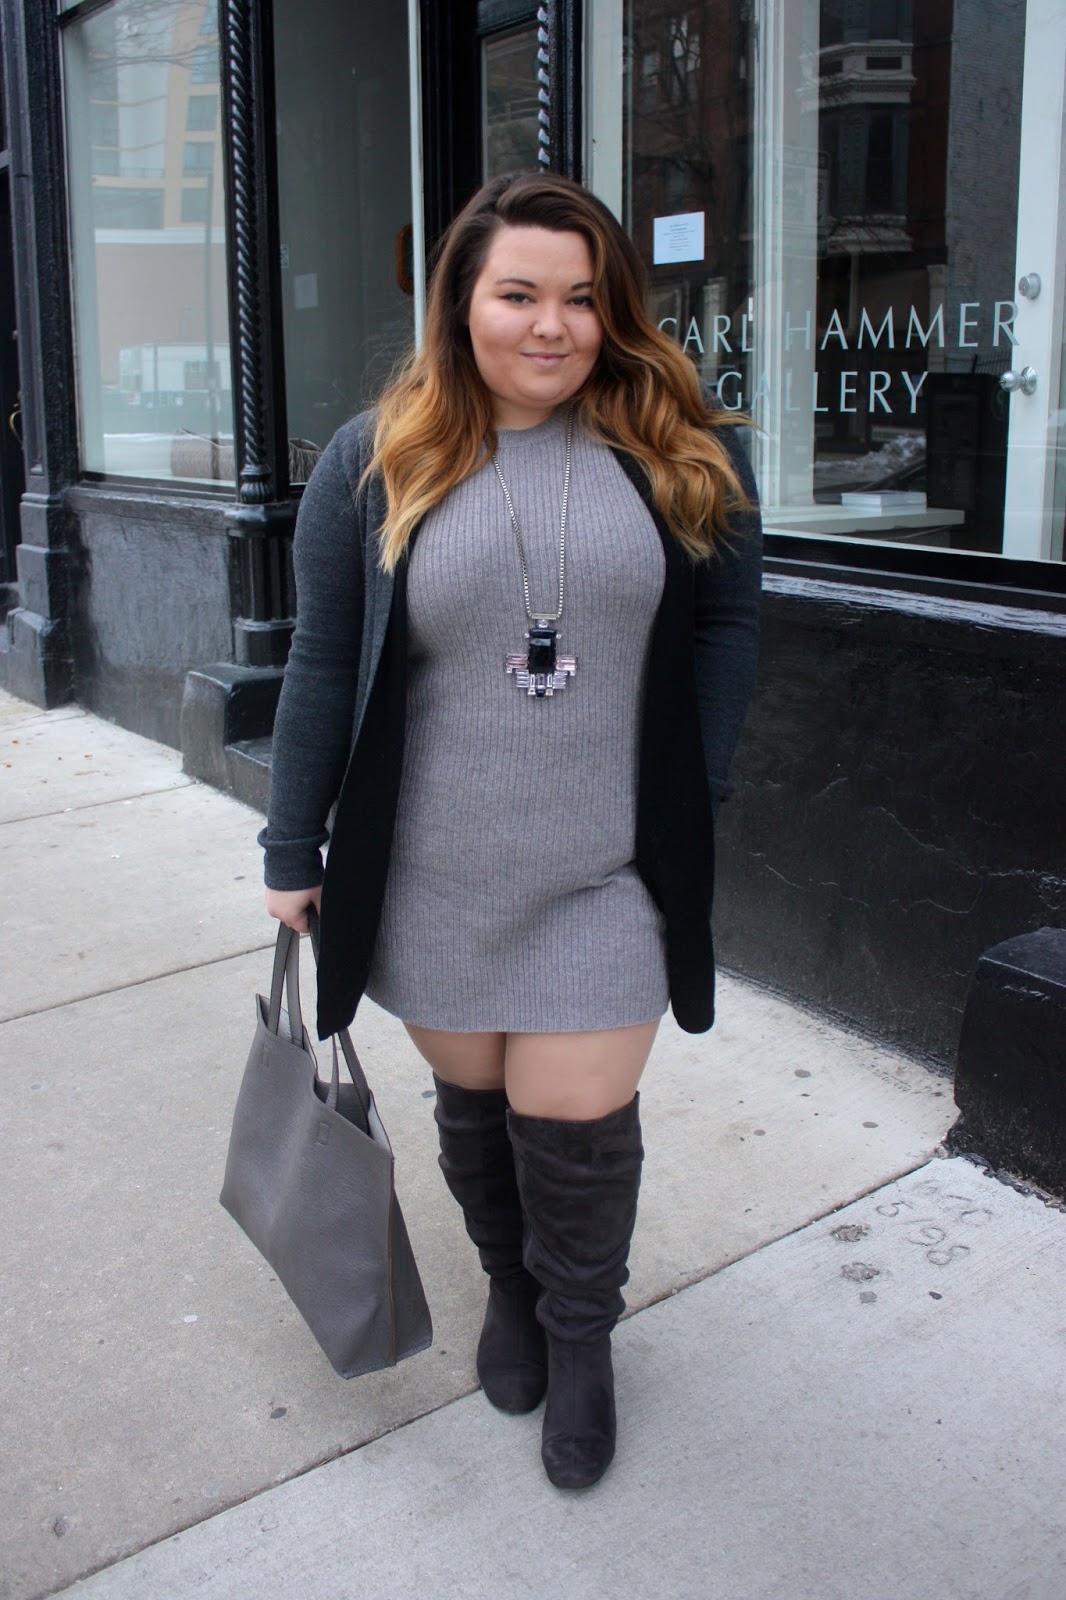 THE MONOCHROMATIC LOOK | Natalie in the City A Chicago Plus Size 